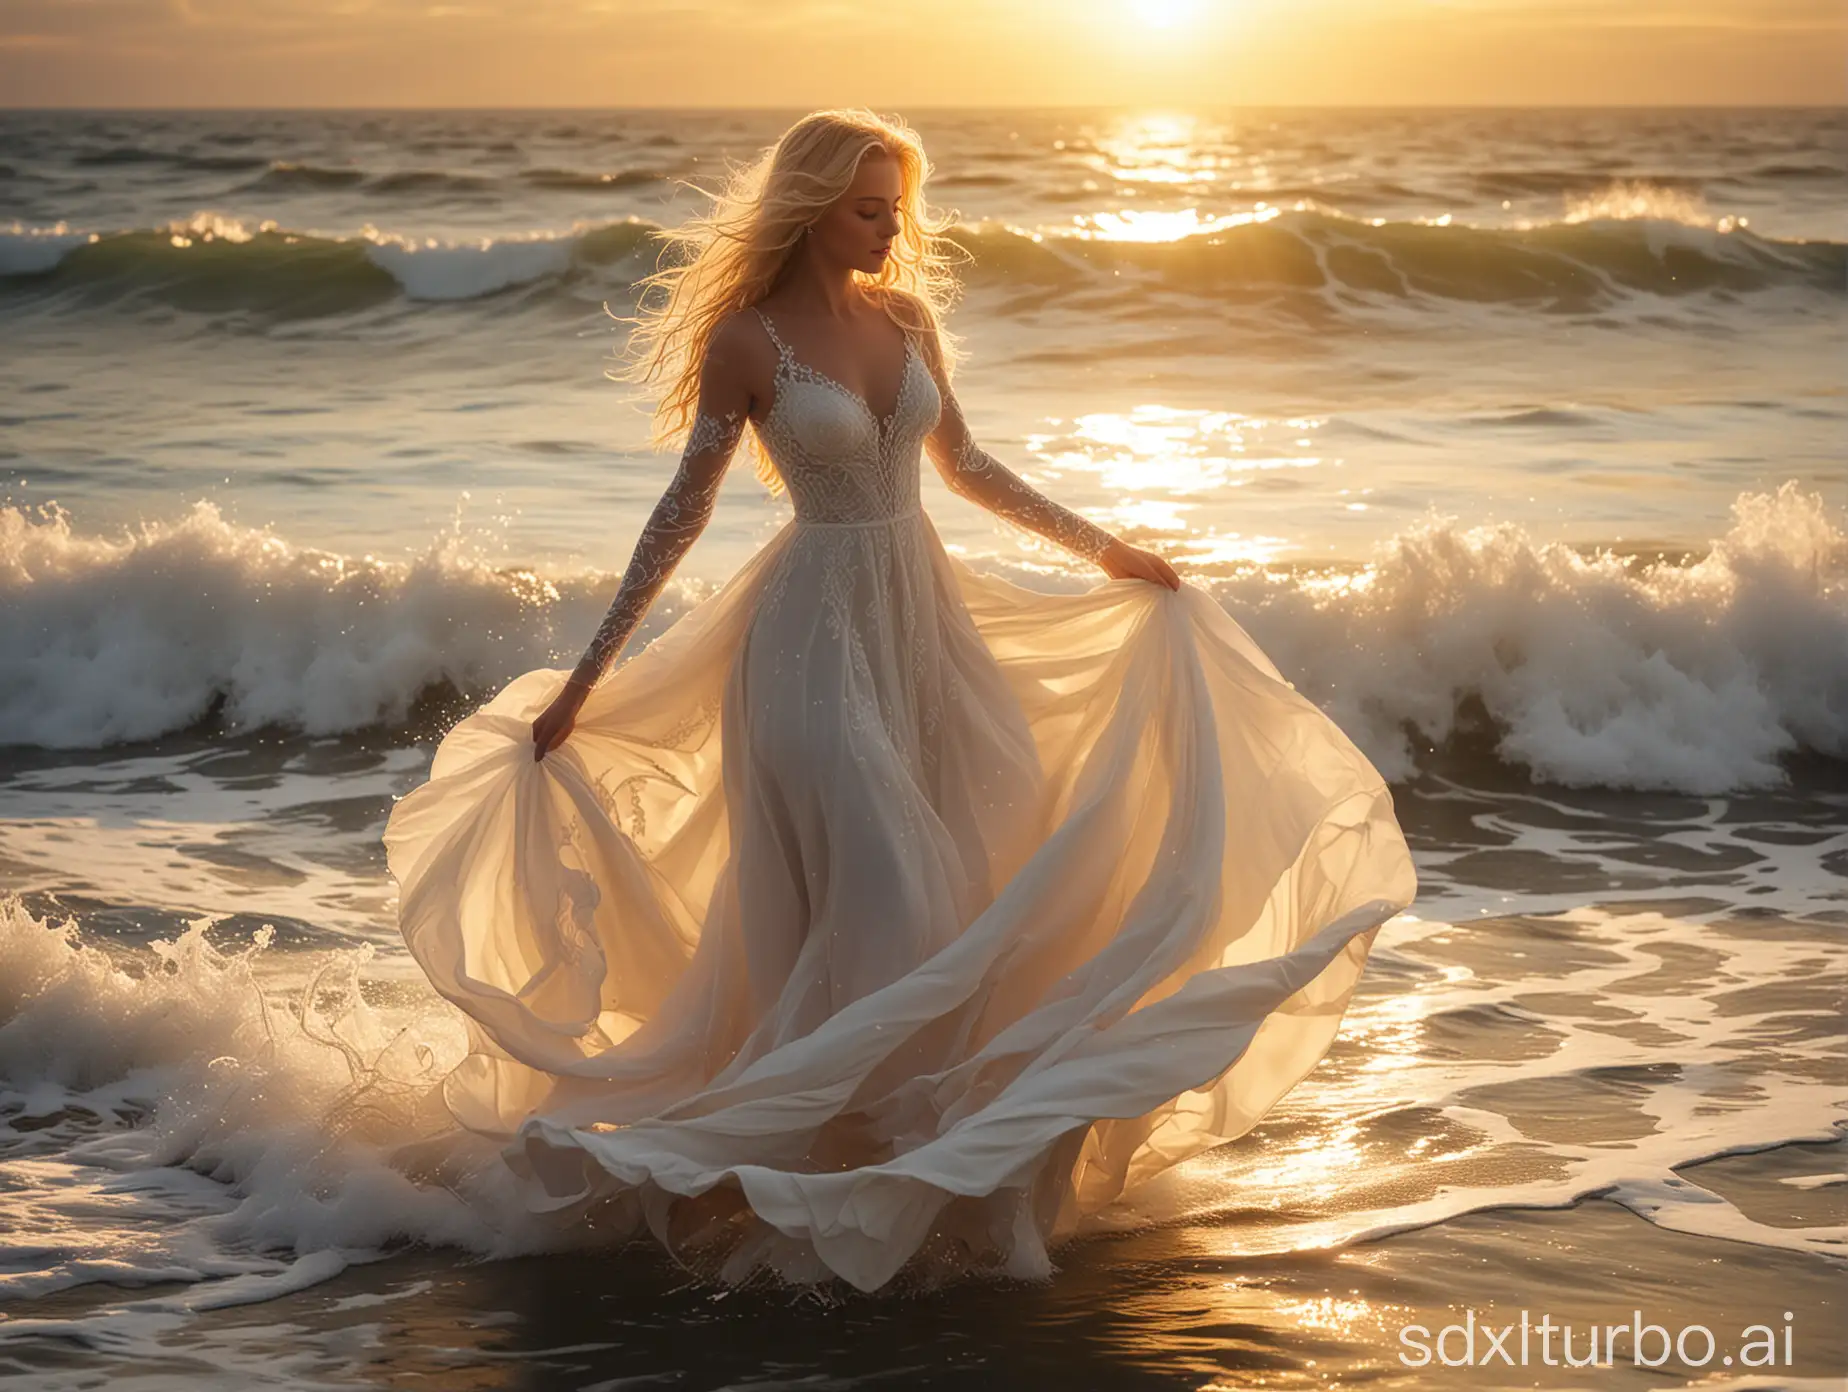 A captivating scene of a woman with cascading blonde hair, elegantly dressed in a radiant white gown, gracefully twirling amidst the mesmerizing waves of a tranquil sea. The golden sun casts its warm, ethereal light upon her, illuminating both her radiant beauty and the shimmering water, creating a surreal and enchanting atmosphere. The waves crash around her, their frothy crests brushing against her gown, while the sunlight dances upon the water's surface, reflecting a dazzling kaleidoscope of light.